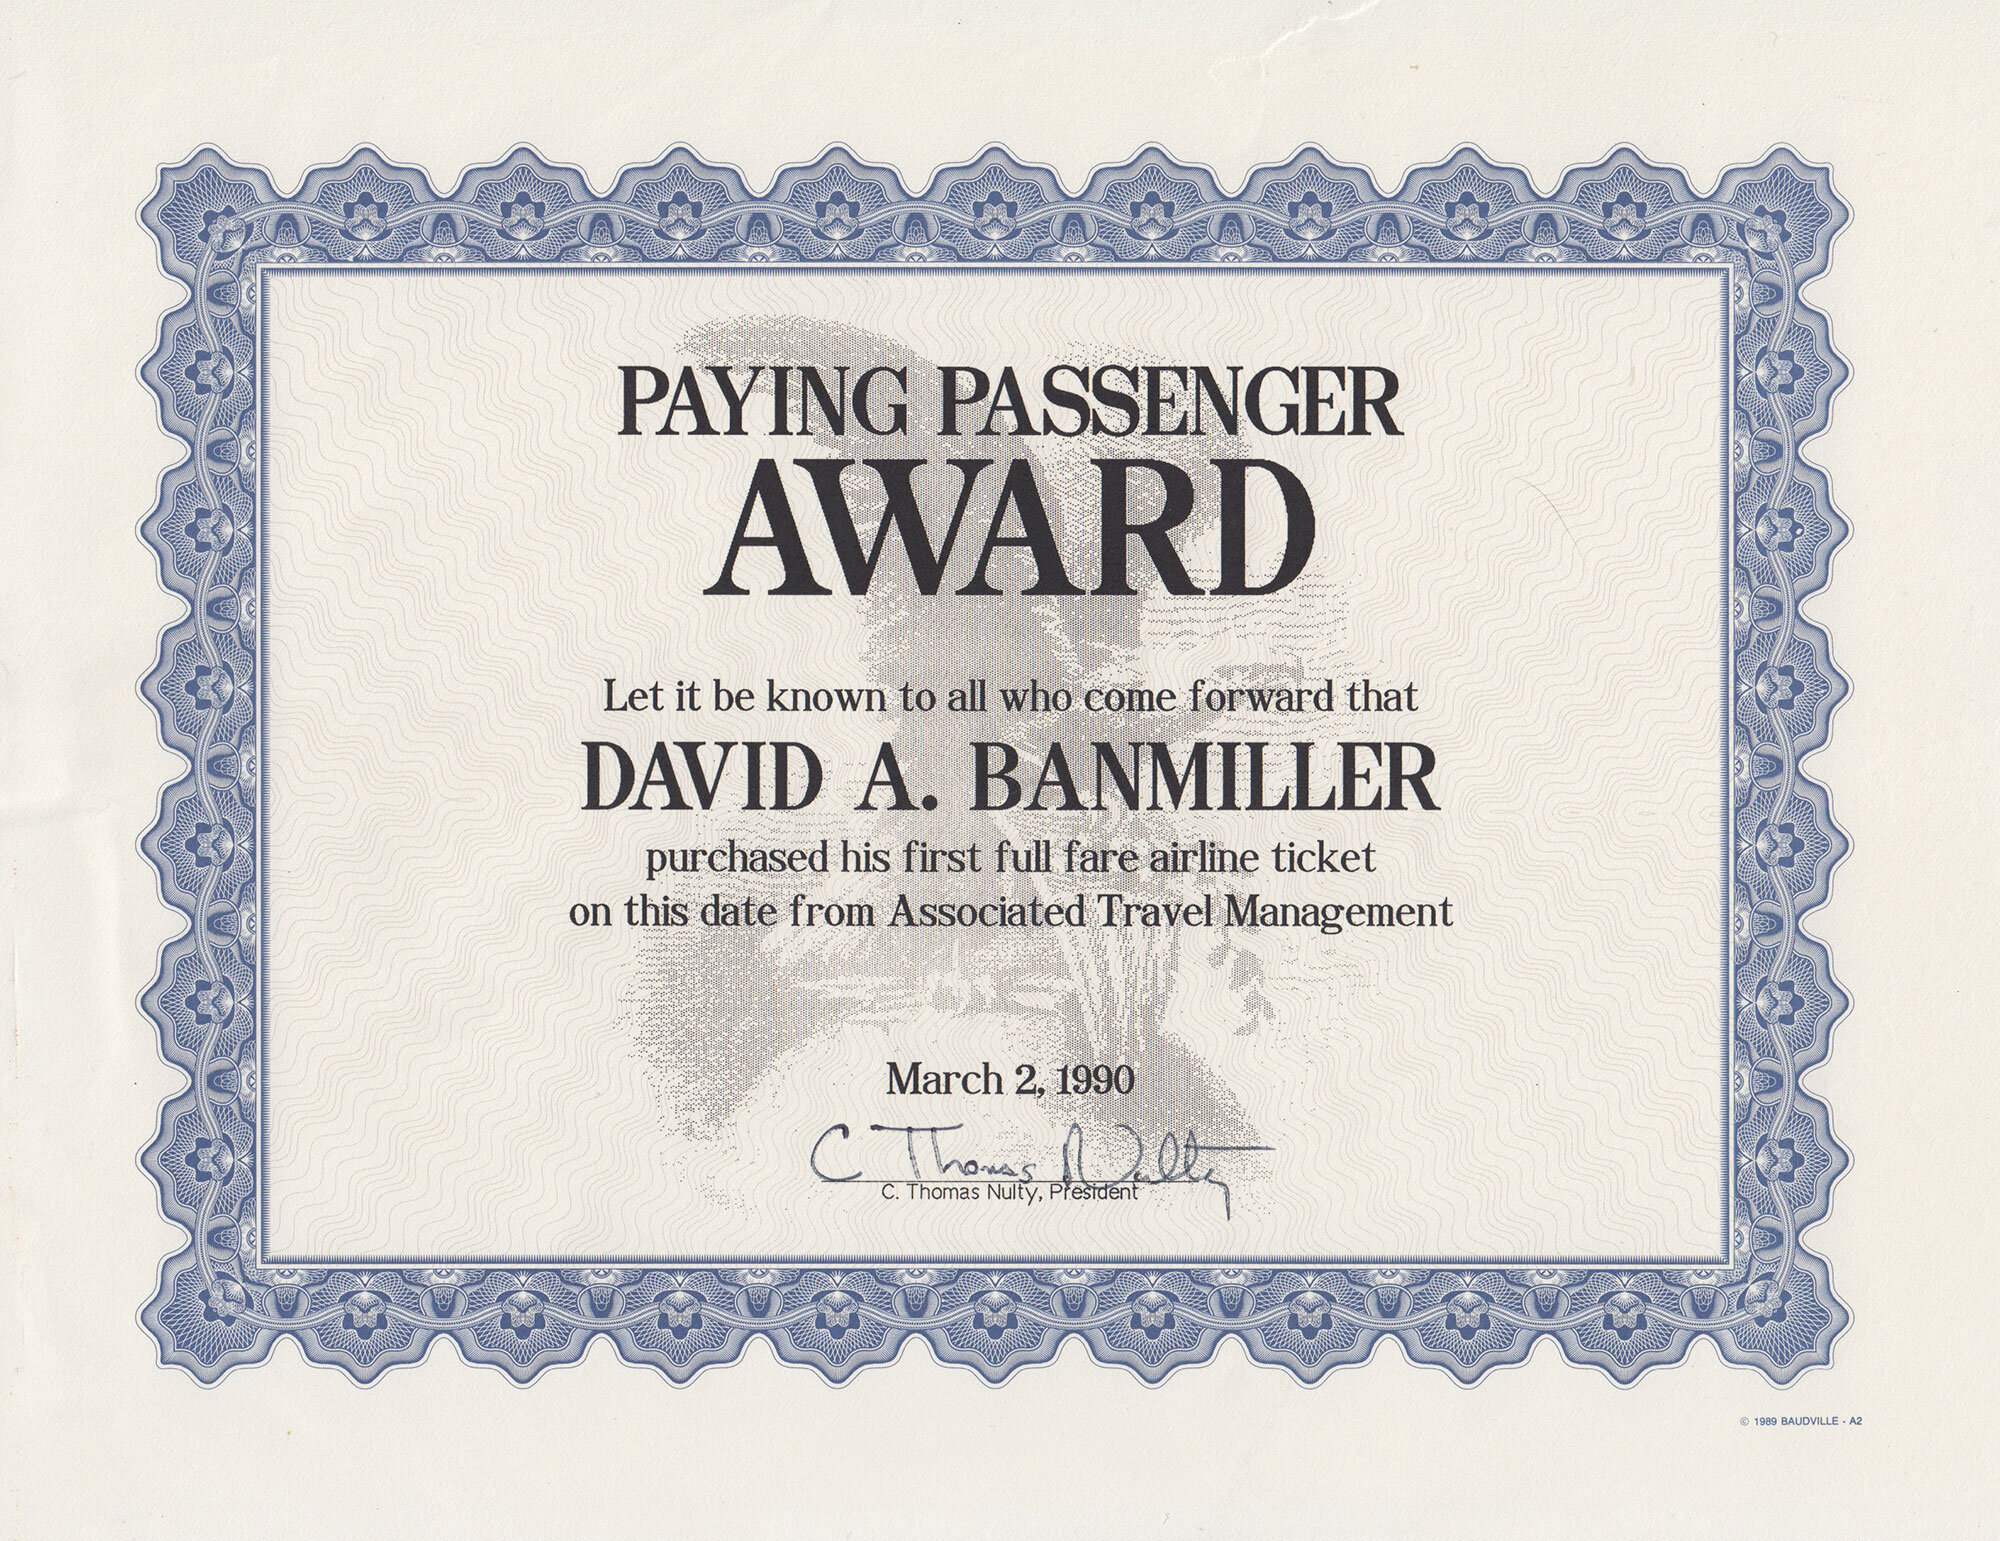  Certificate from travel agent and friend Thom Nulty on my first paid ticket:   “He’s known as a mover and a shaker by the whole industry,” said Thom Nulty, former President of Navigant Travel and SVP, Marketing at Aloha. “He doesn't let moss grow on